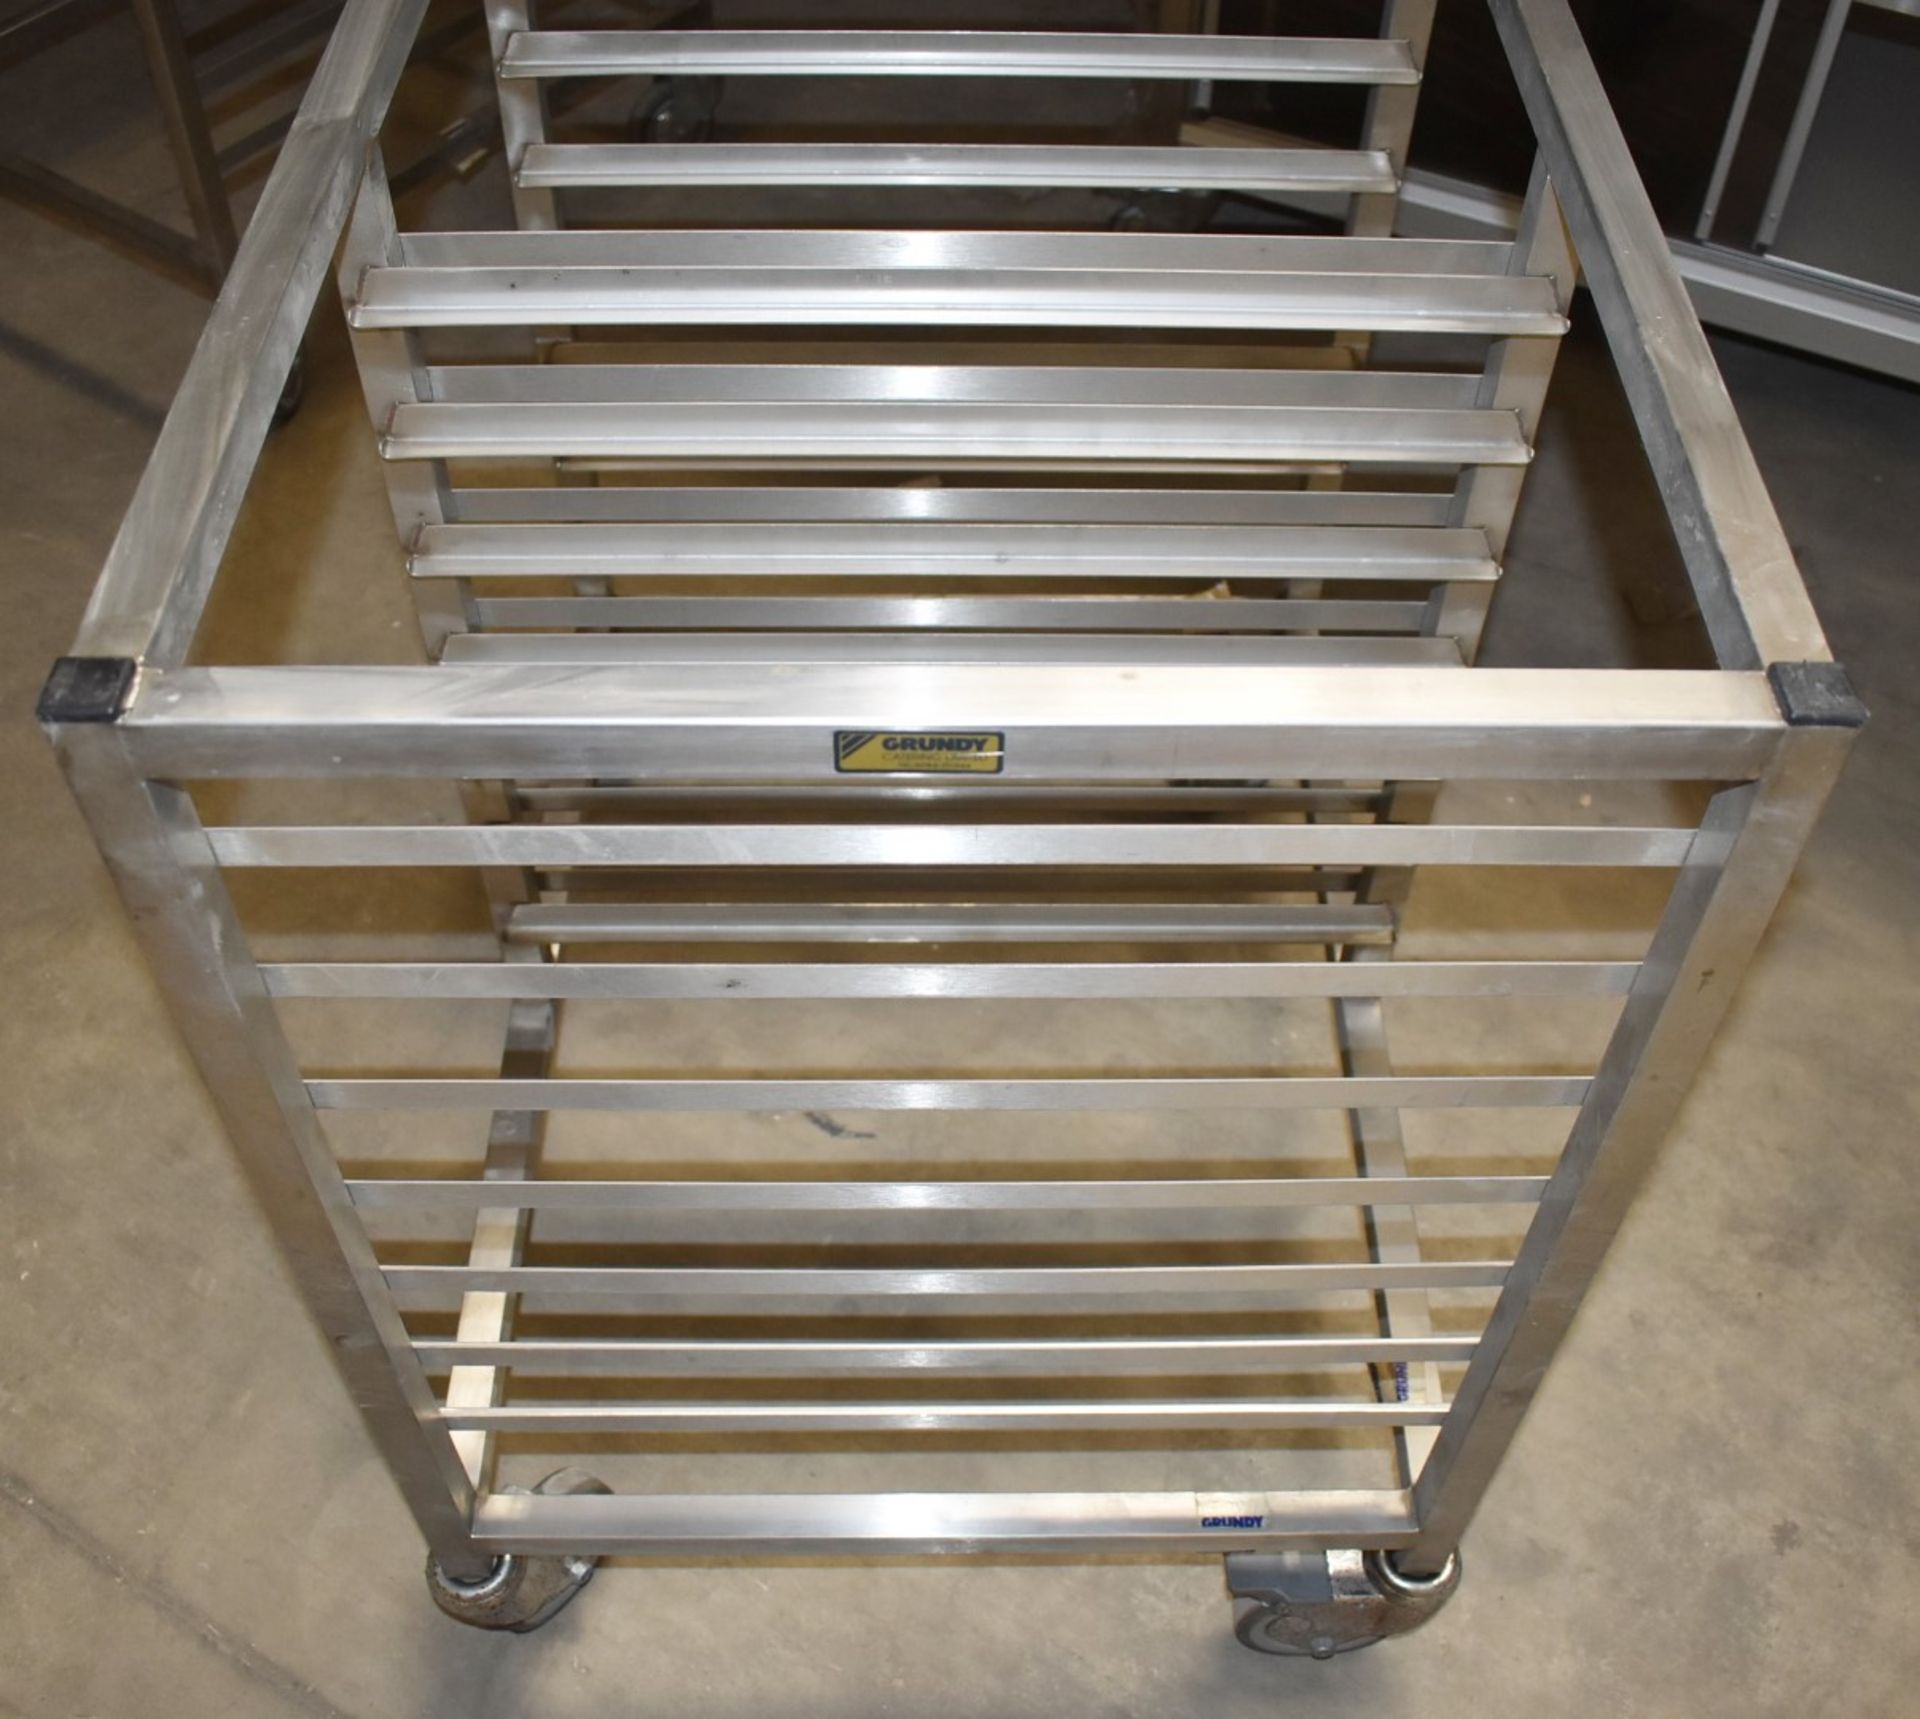 1 x Grundy Stainless Steel 14 Tier Side by Side Mobile Tray Stand - Unused - Ref JP137 WH2 - - Image 4 of 6